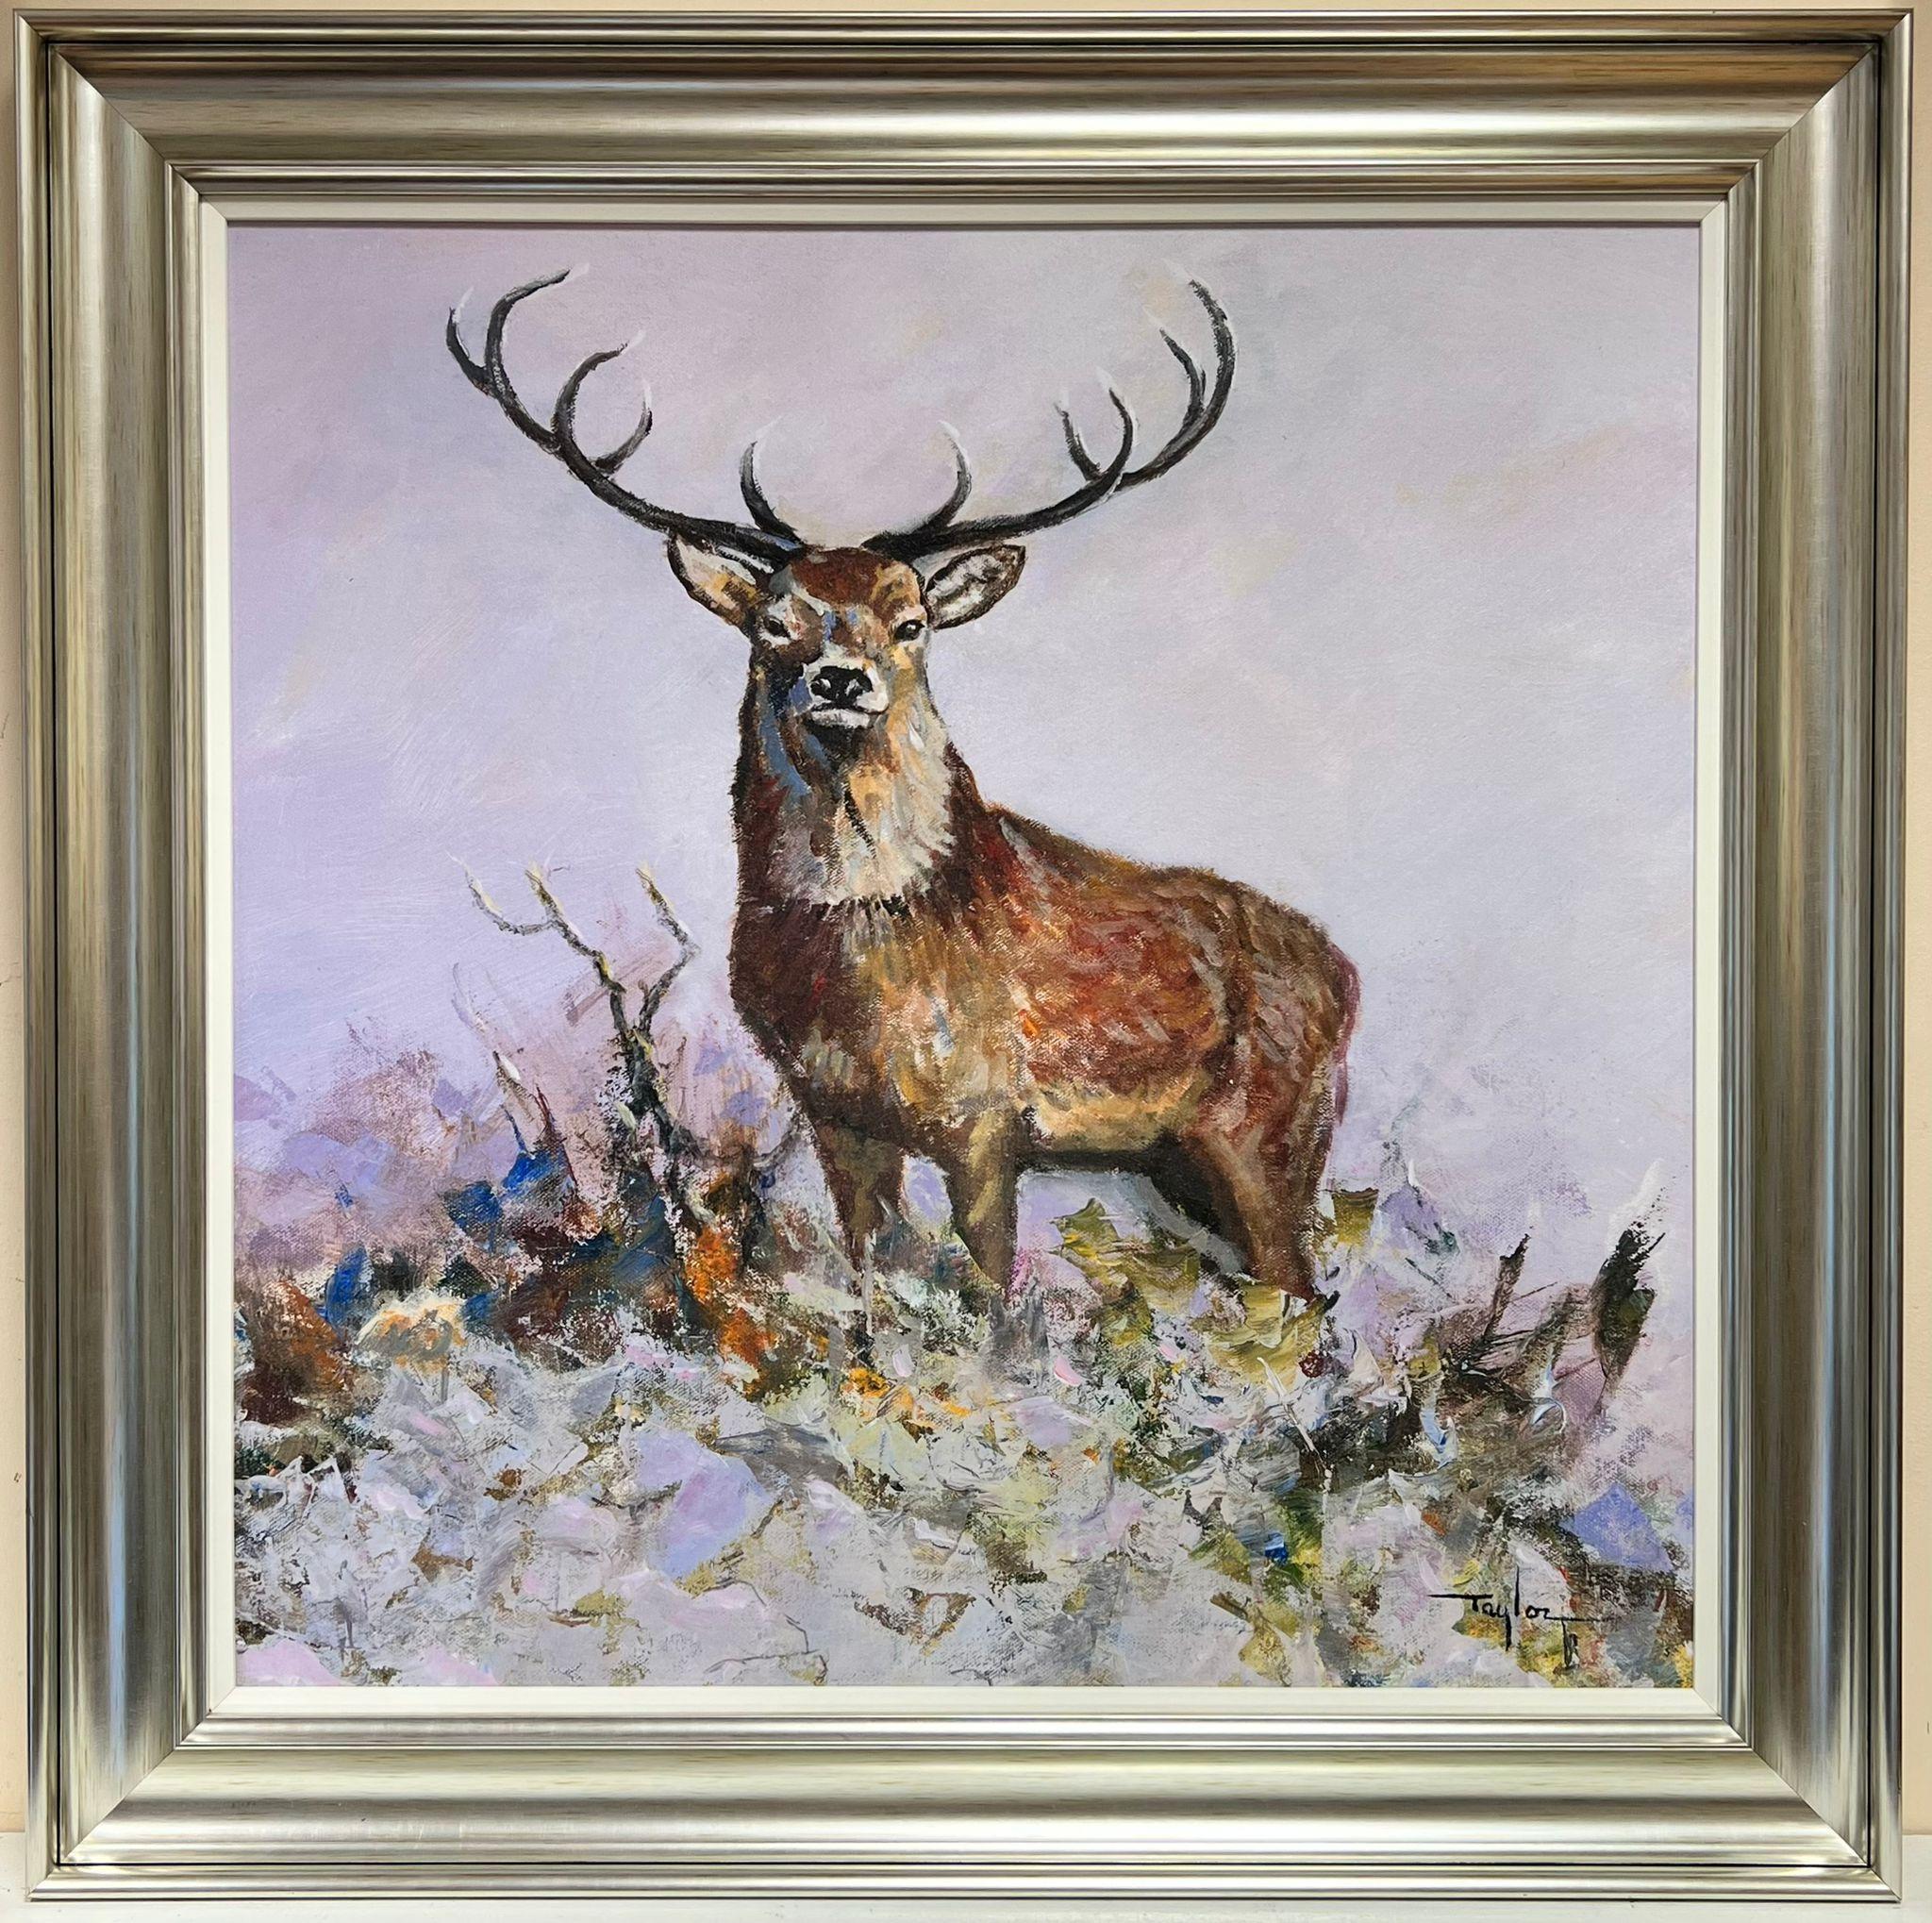 Taylor Animal Painting - Huge Contemporary British Painting - The Monarch of the Glen Highland Stag